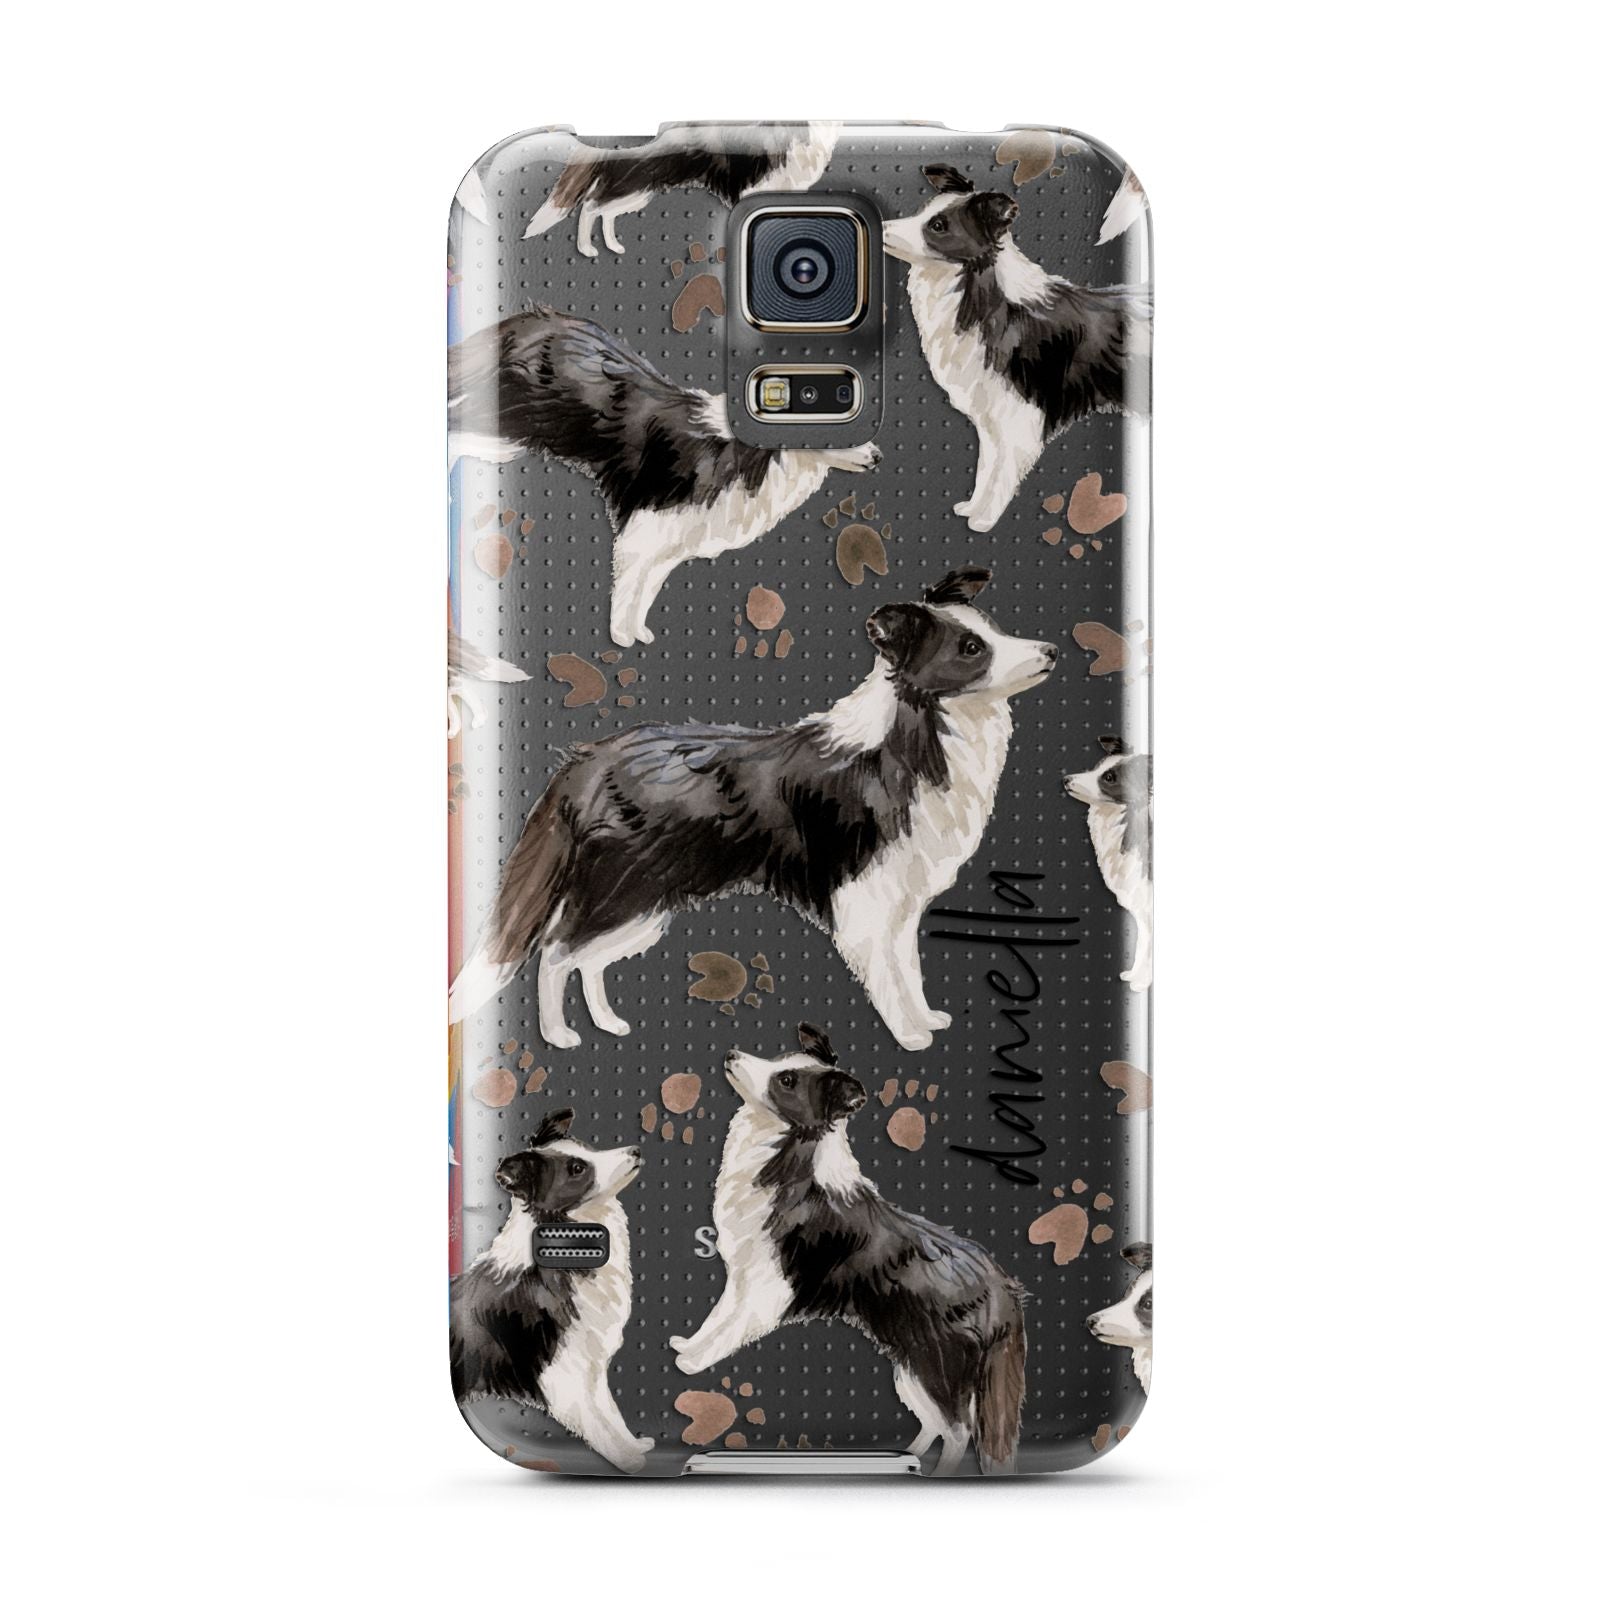 Personalised Border Collie Dog Samsung Galaxy S5 Case